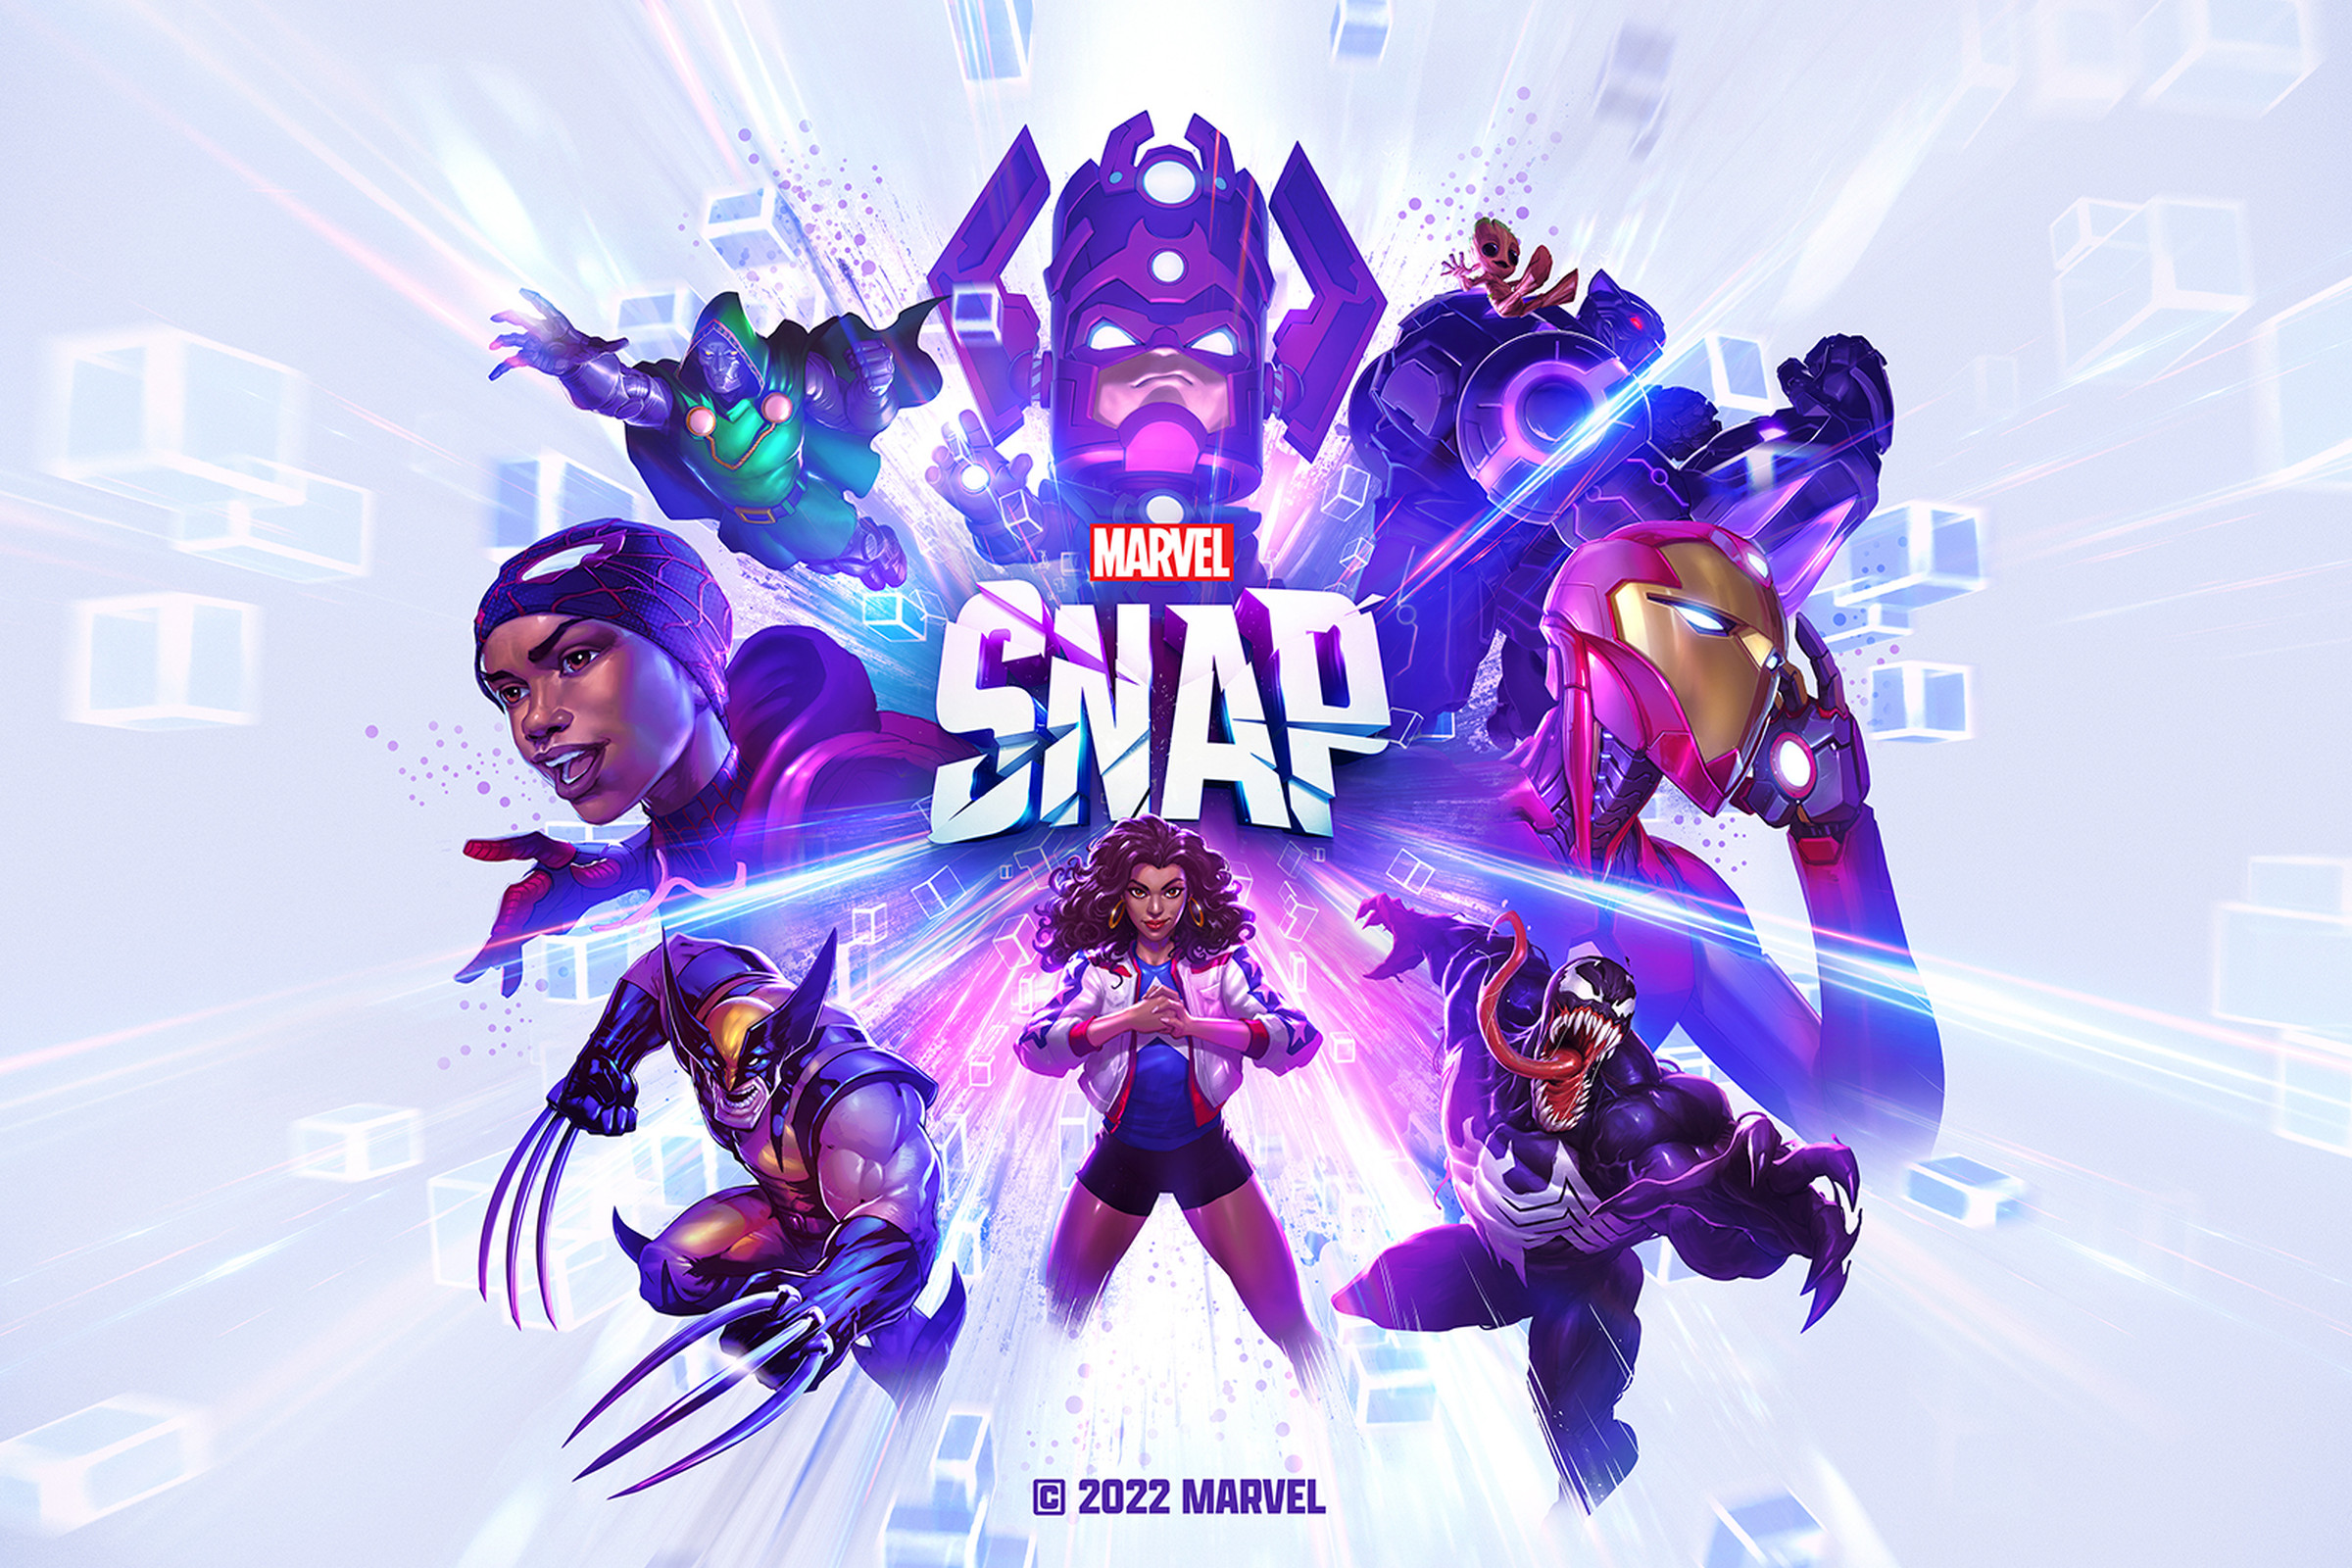 Key art from Marvel Snap featuring a collection of Marvel superheroes with America Chavez in the center of the group